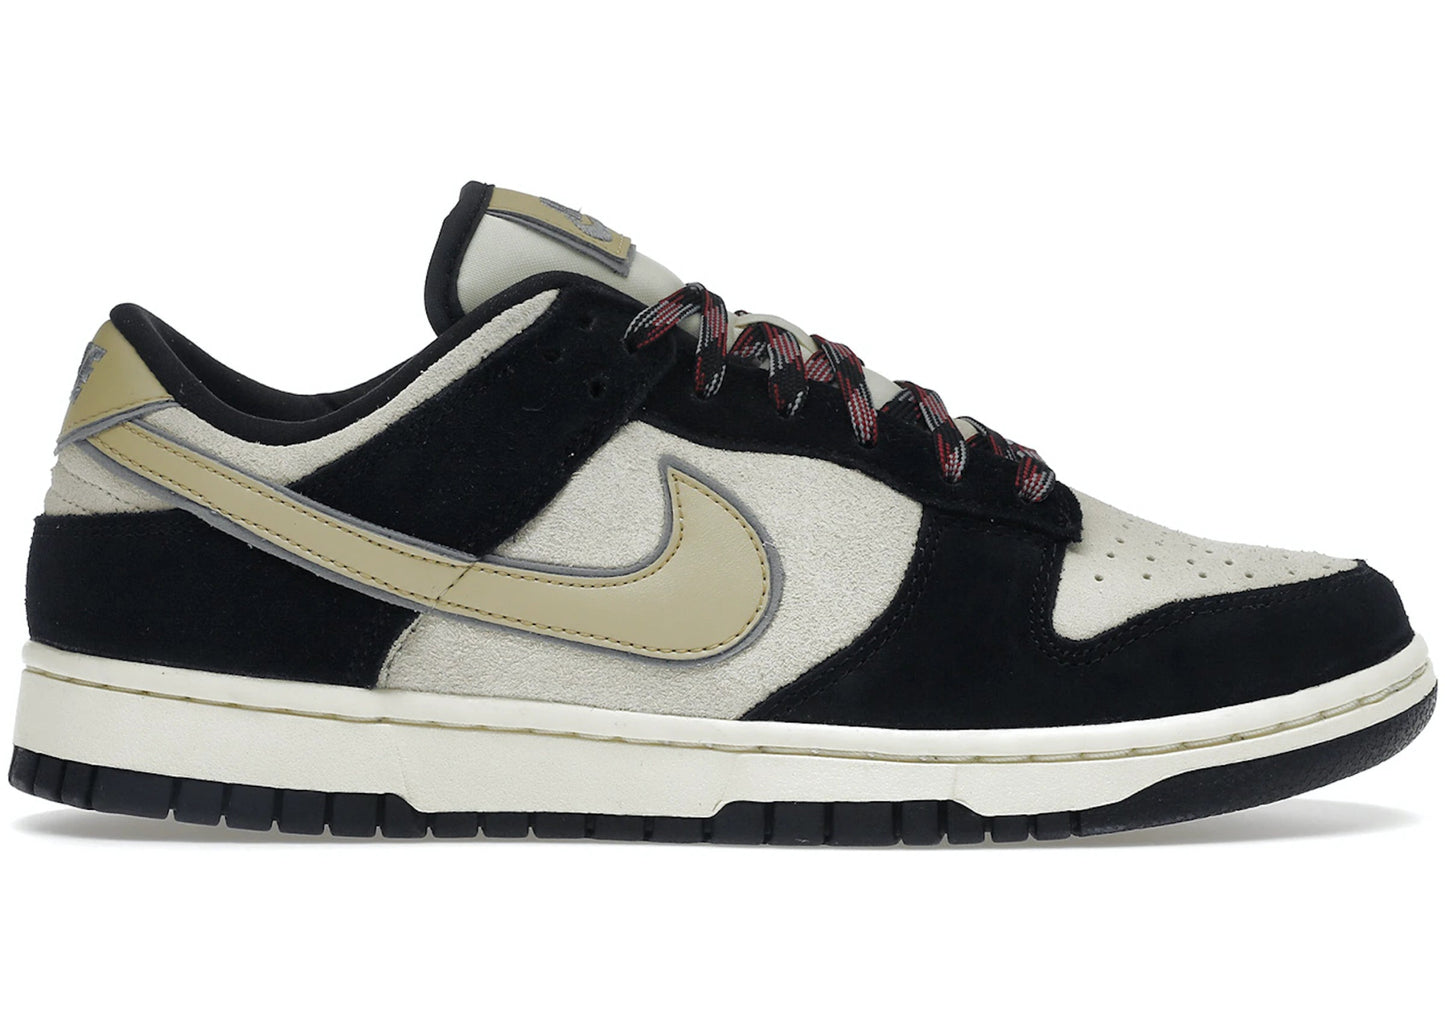 Nike Dunk Low LX Black Suede Team Gold (W) - Supra Sneakers